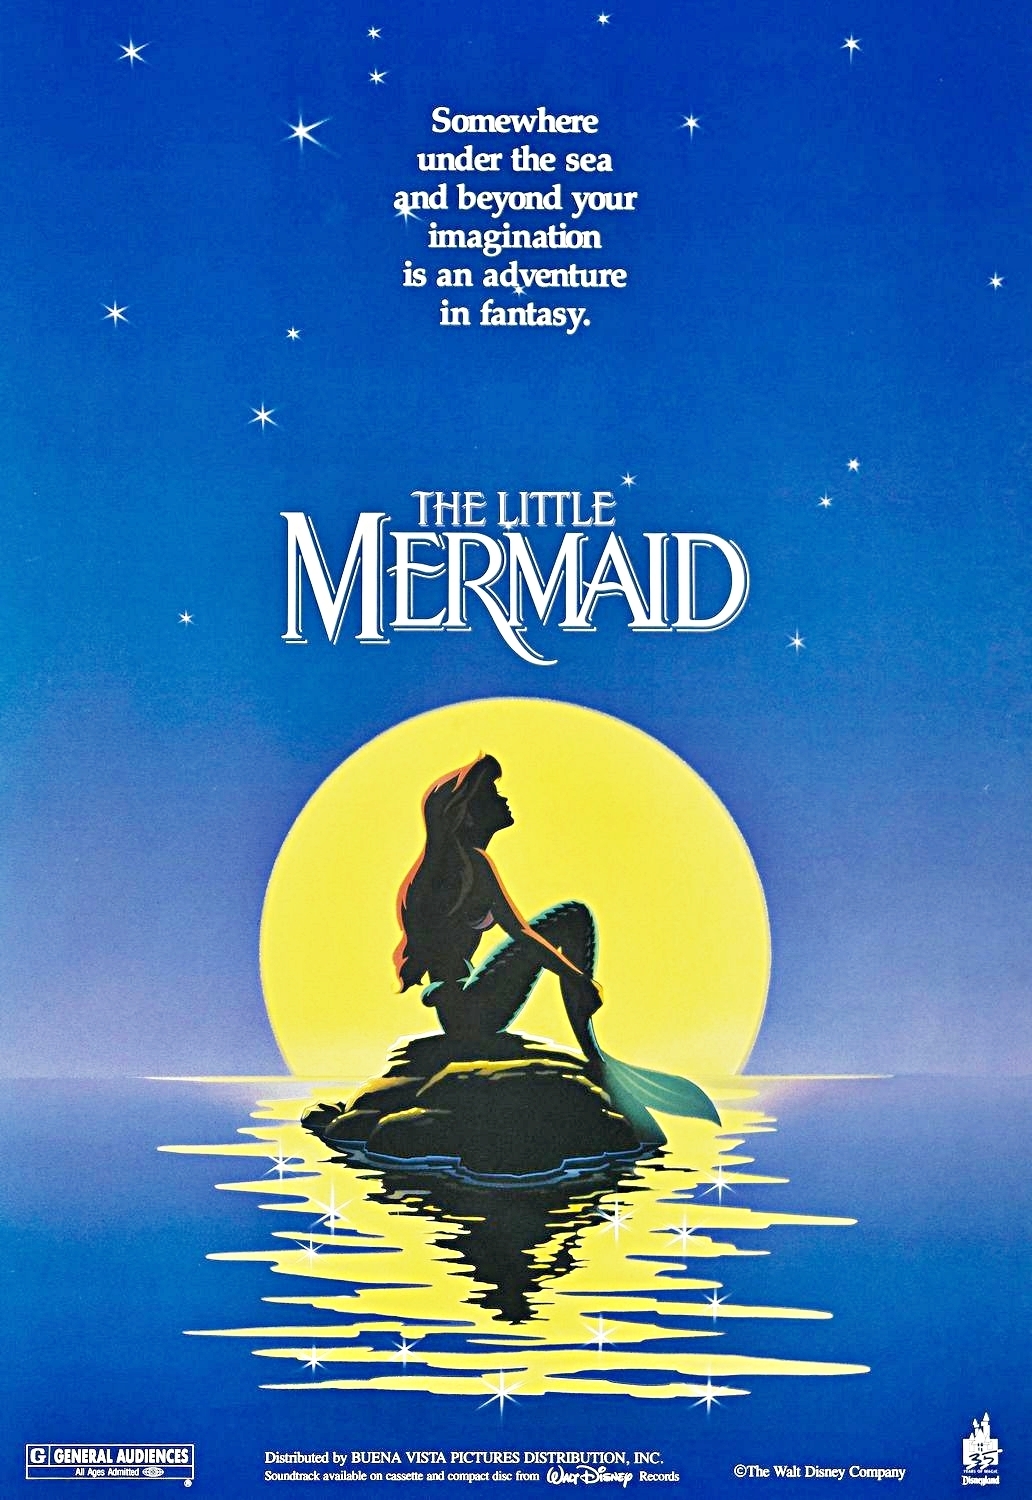 https://static.wikia.nocookie.net/disney/images/1/10/The_Little_Mermaid_poster.jpg/revision/latest?cb=20190822153550